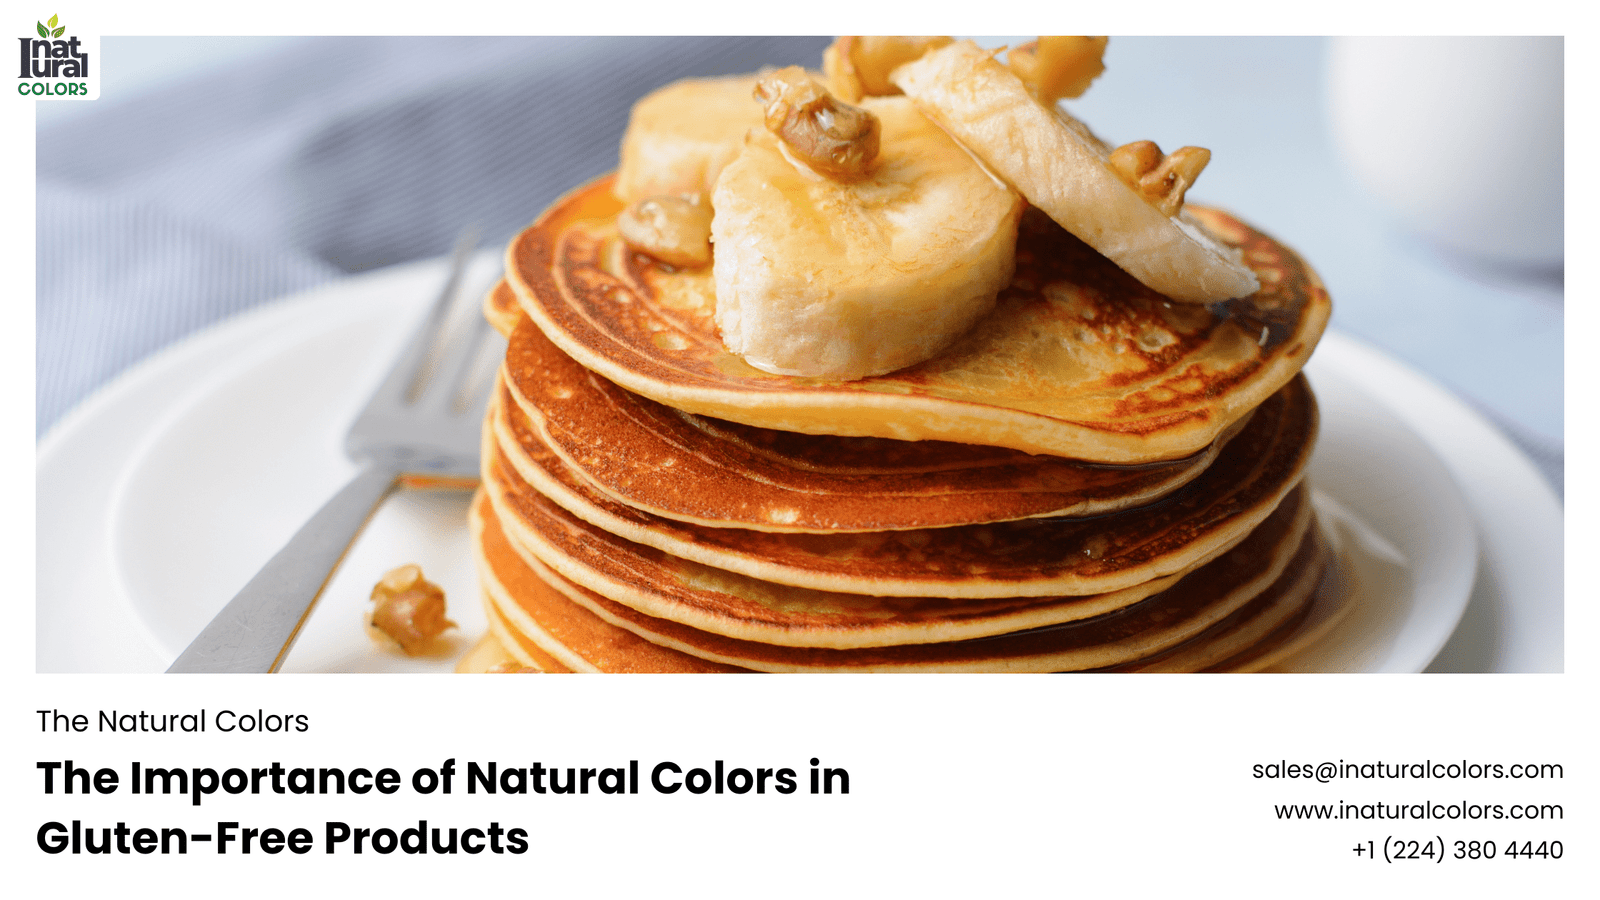 Natural Colors in Gluten-Free Products